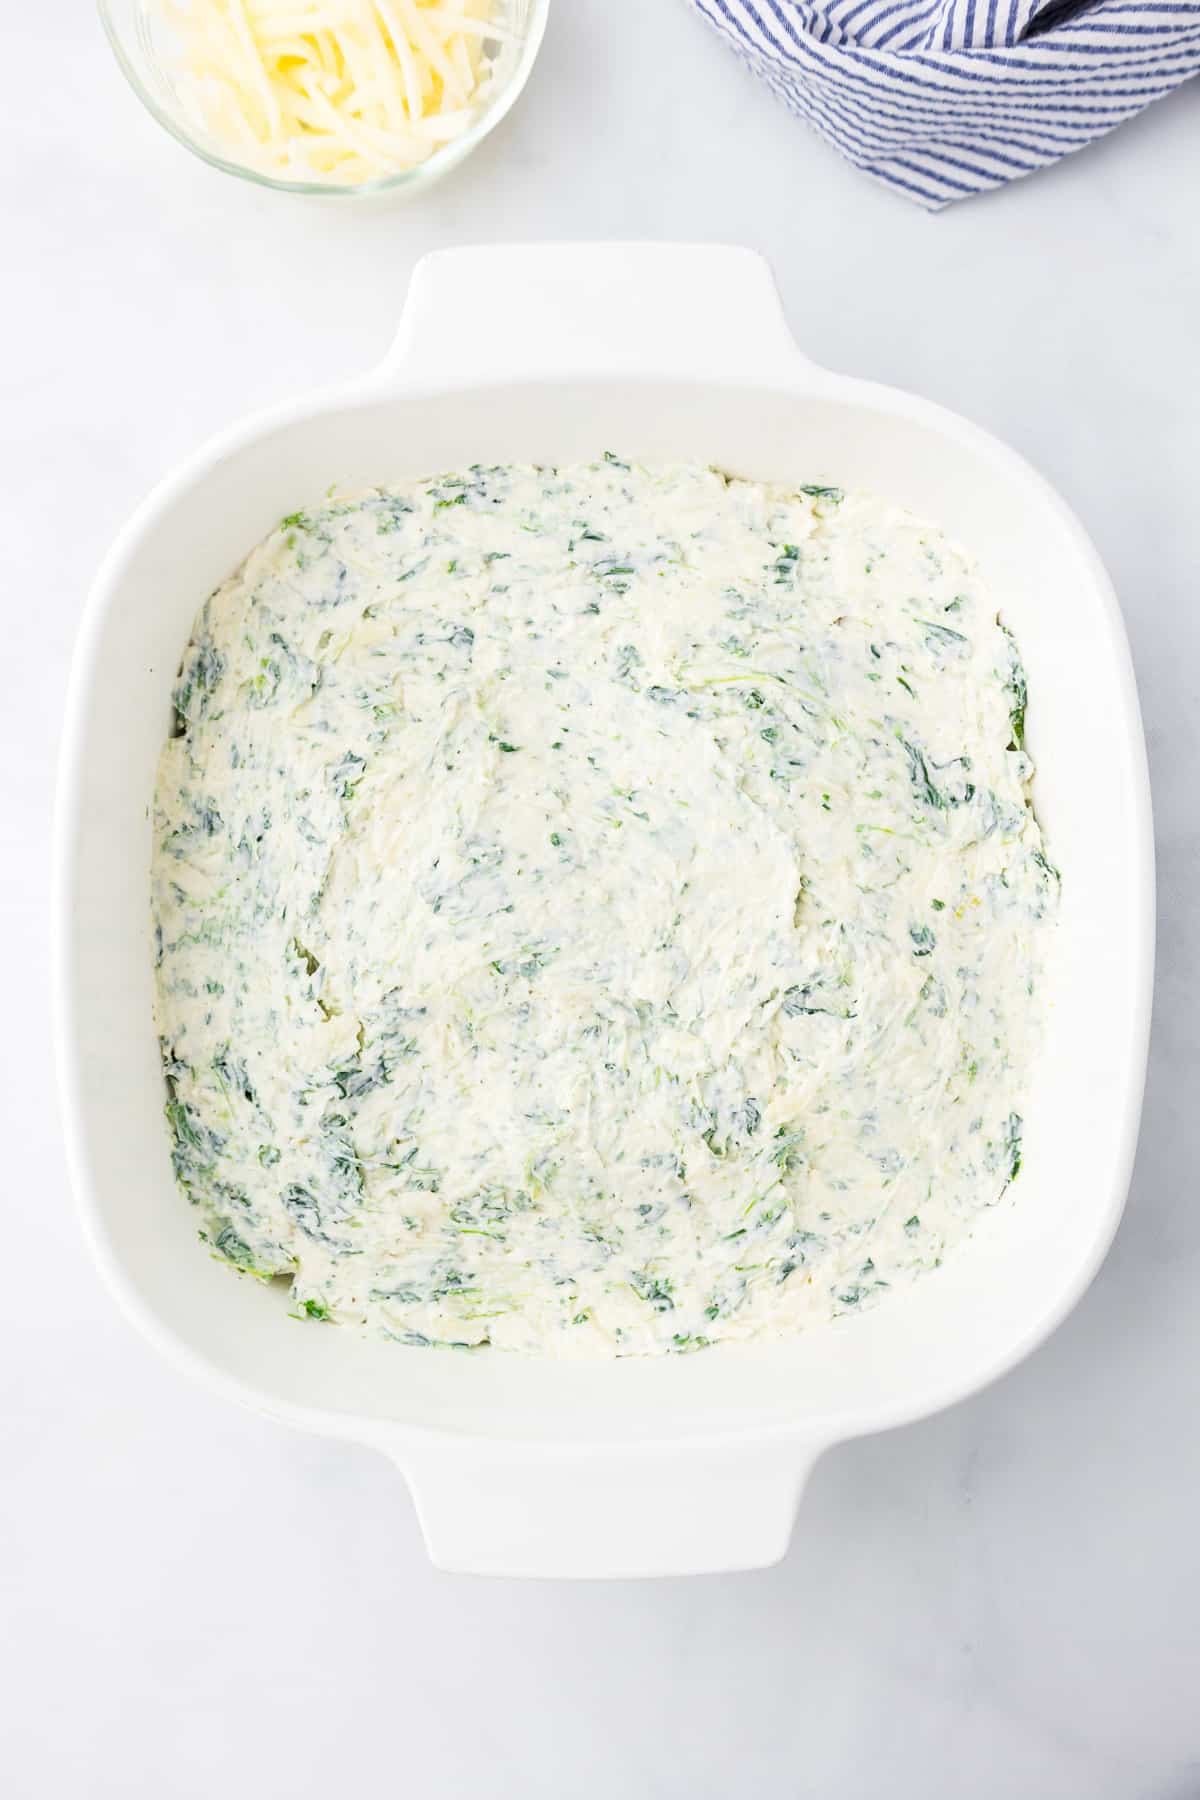 Cheesy spinach dip in a white square dish before baking.